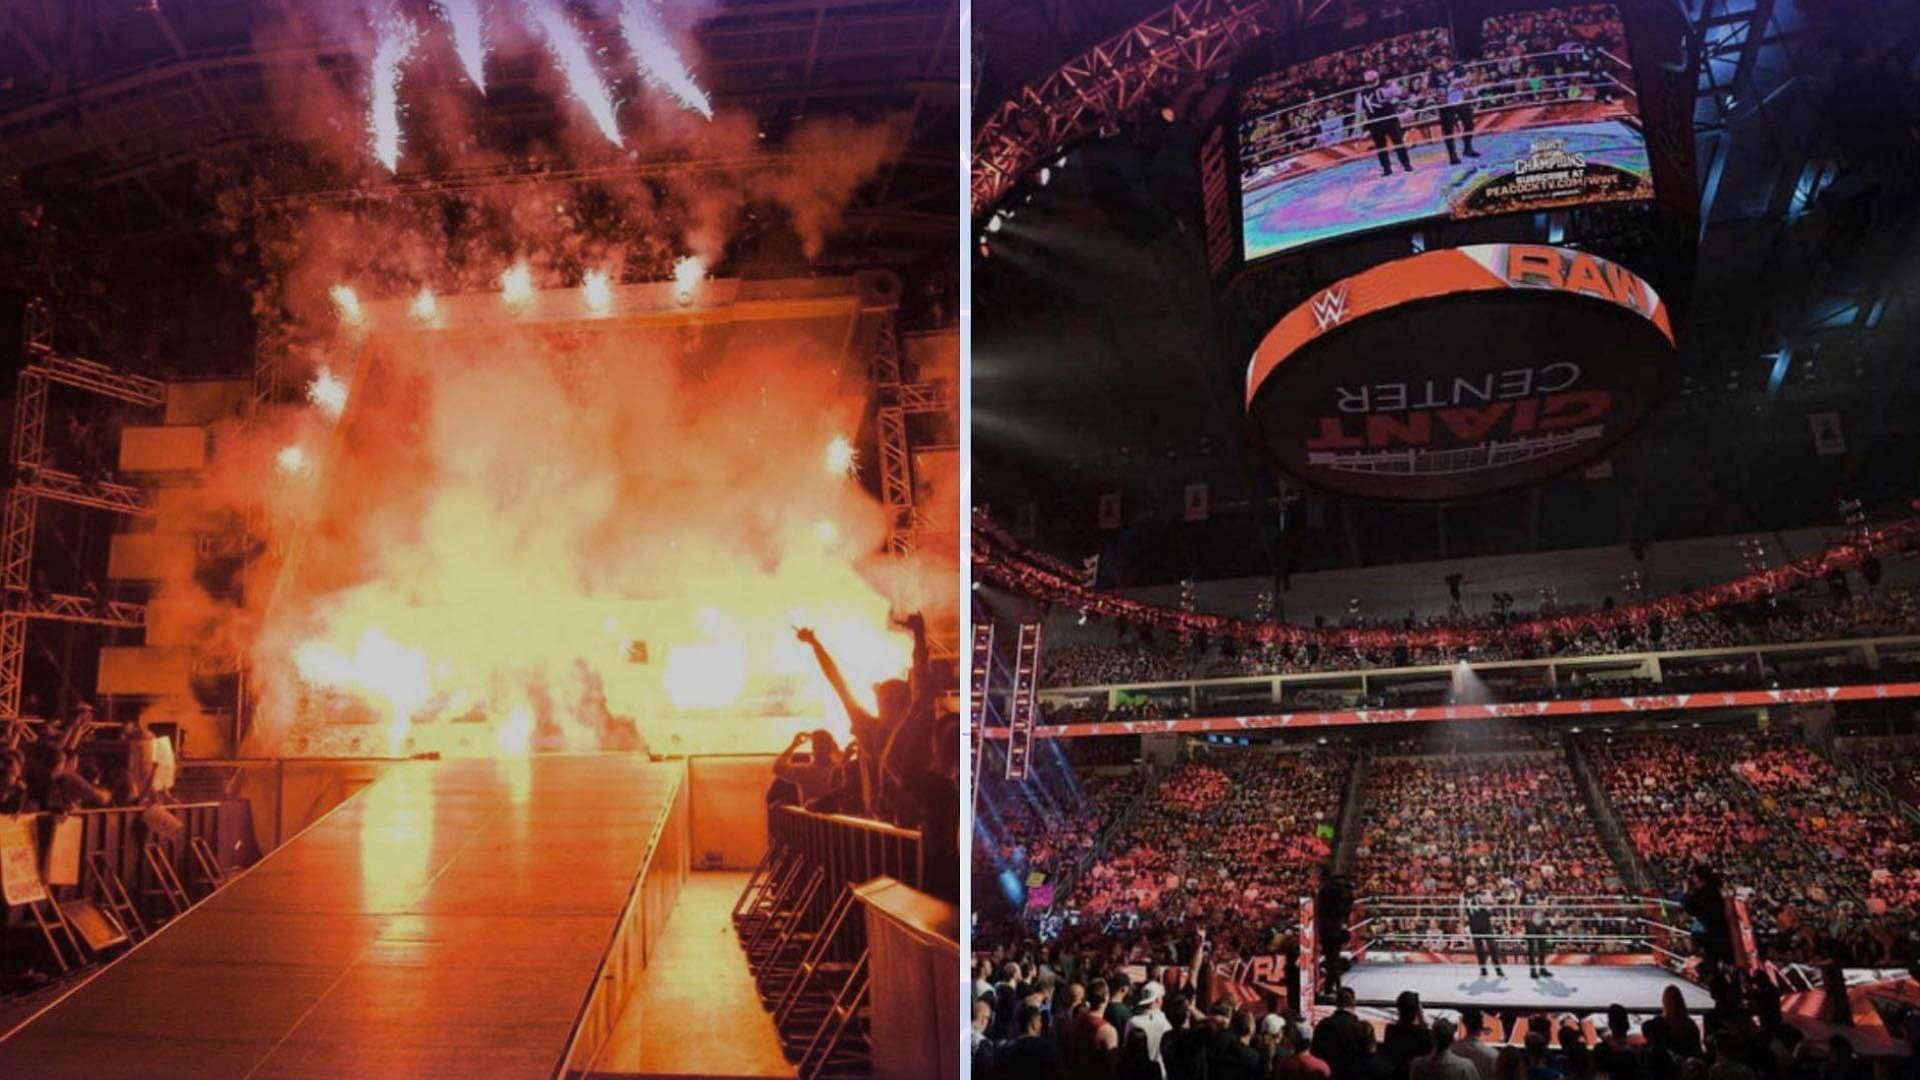 WWE RAW this week was live from the Rupp Arena in Lexington, Kentucky